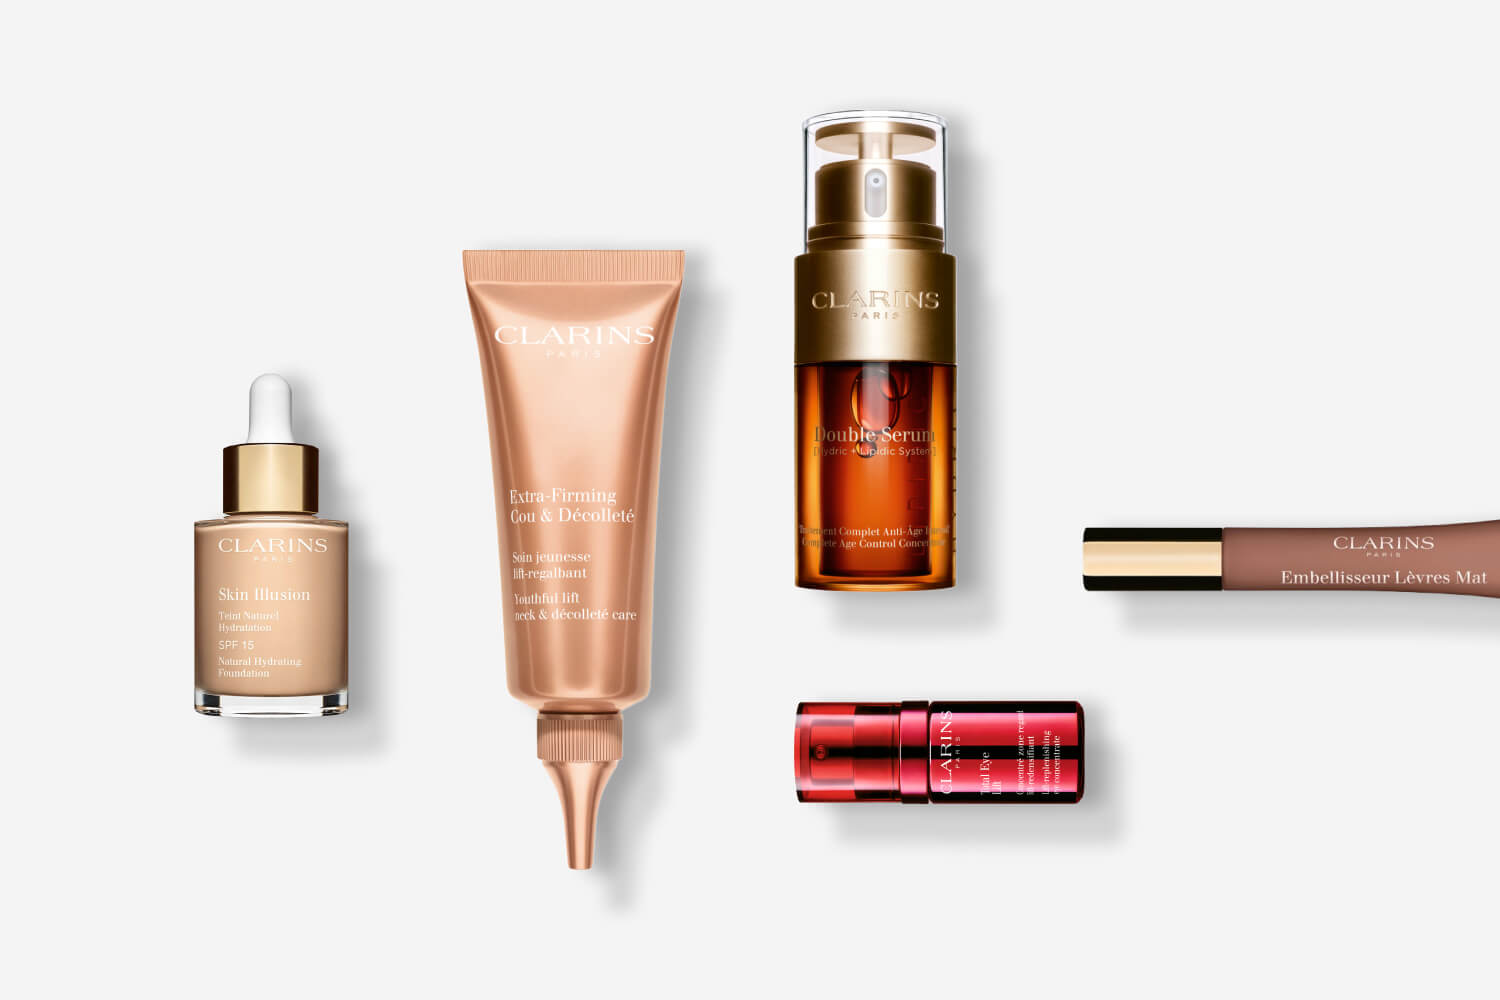 Stå sammen Rund ned I øvrigt The Best Clarins Products to Try in 2023 · Care to Beauty